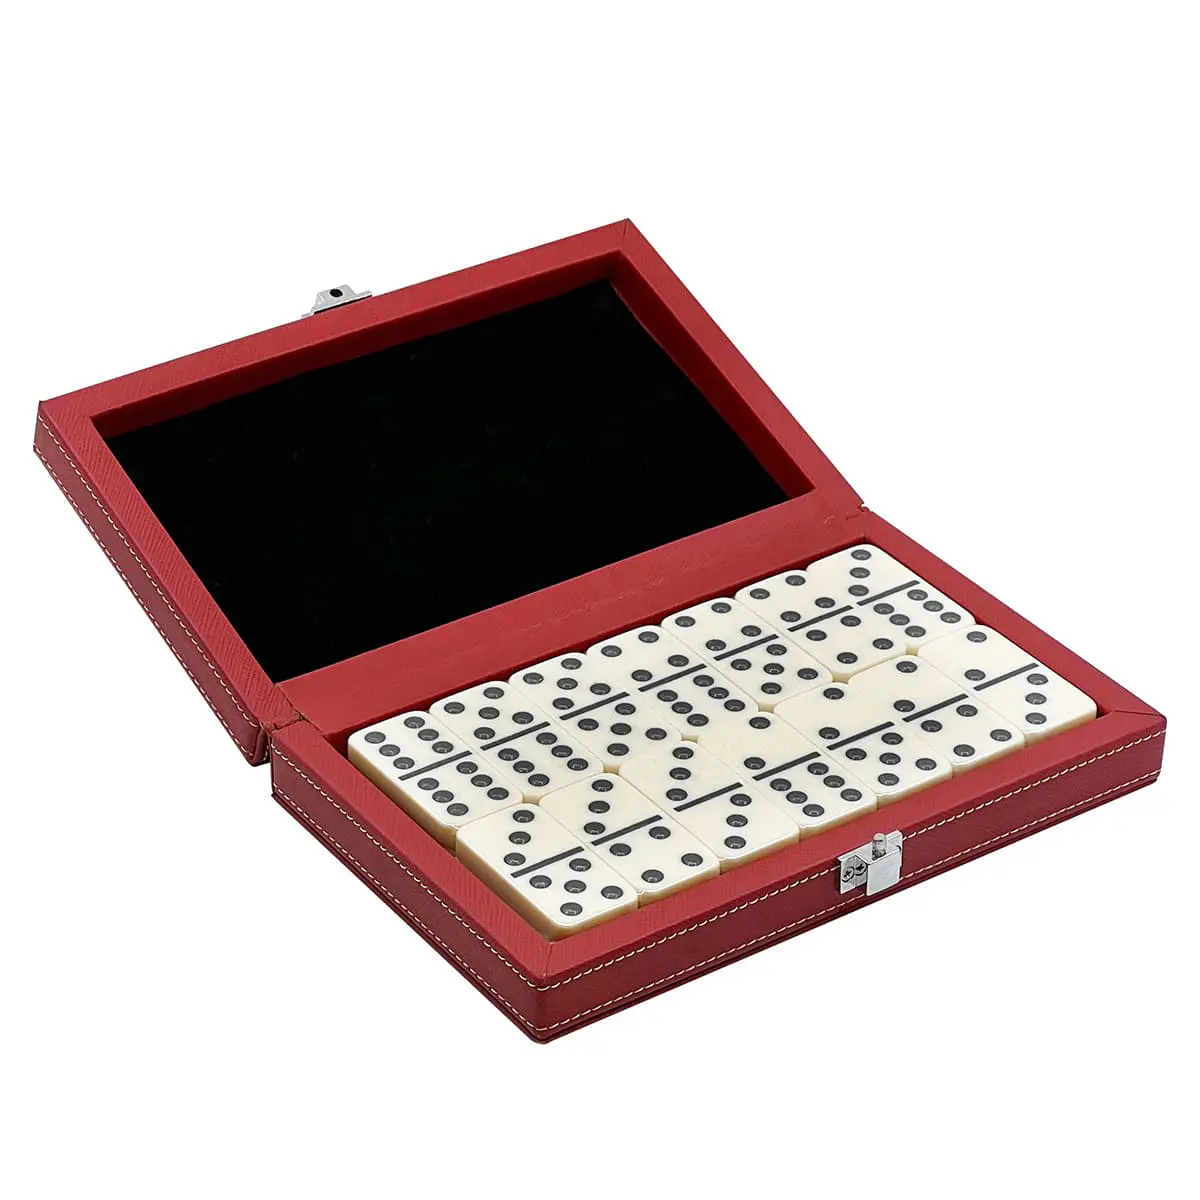 Double 6 Domino Set in Leatherette Case